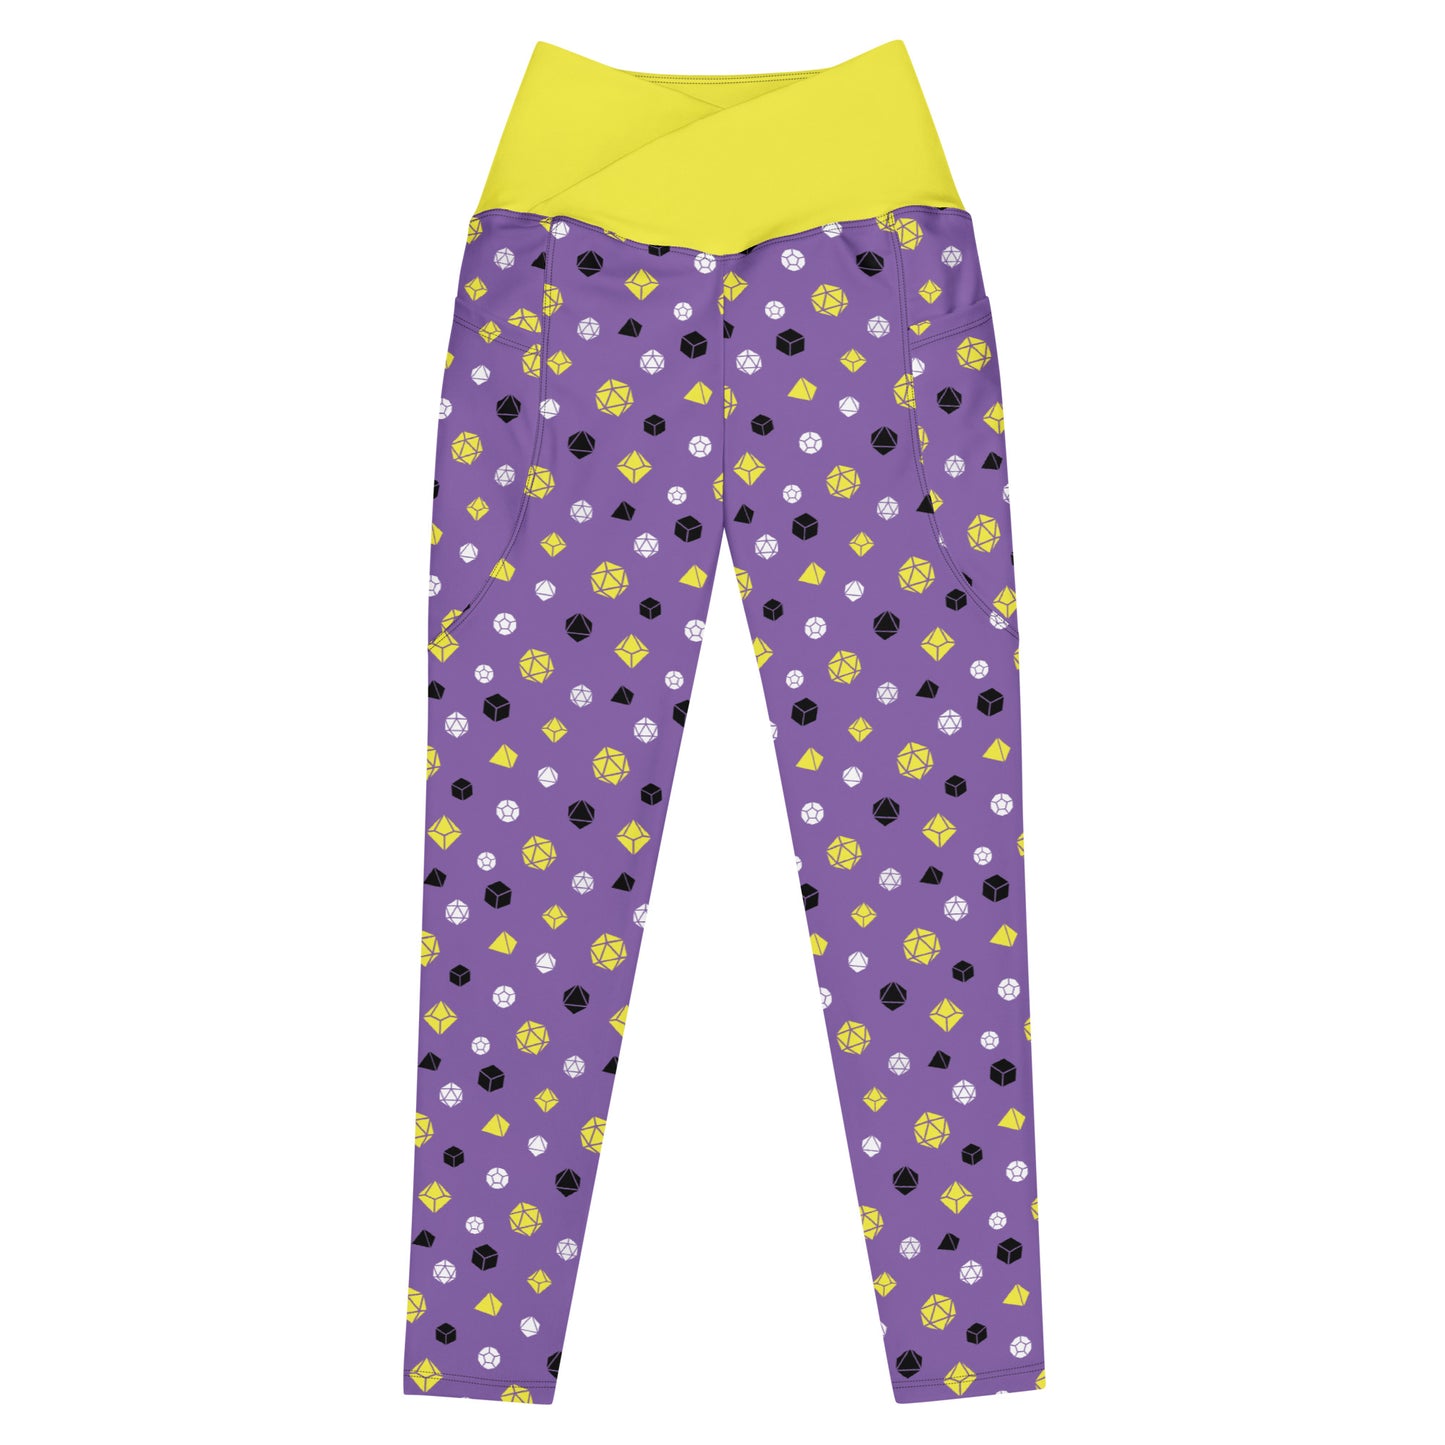 nonbinary dice leggings flat on white background